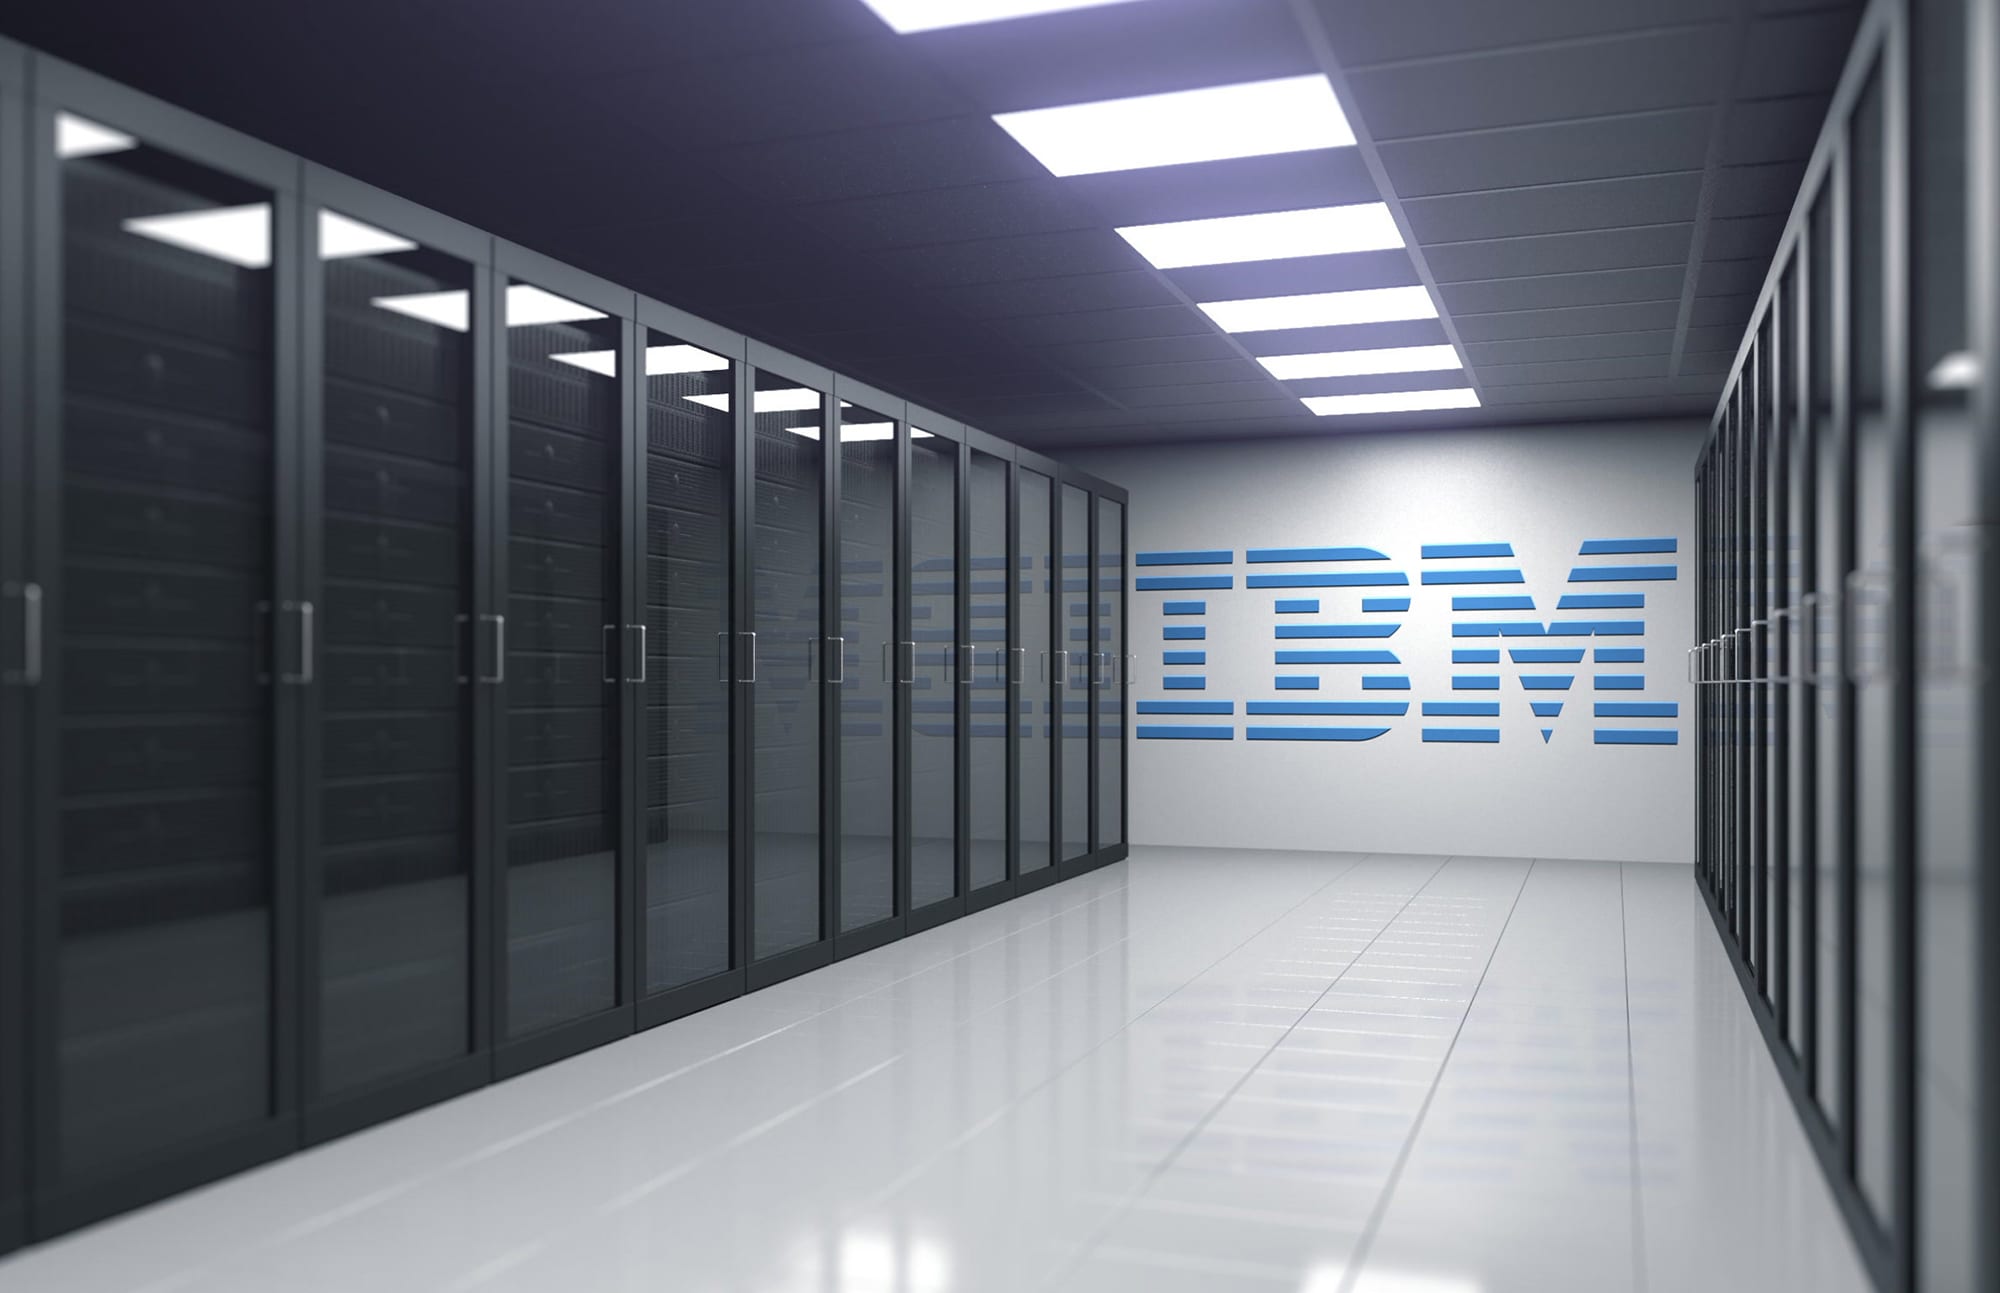 Logo of IBM on the wall of a server room